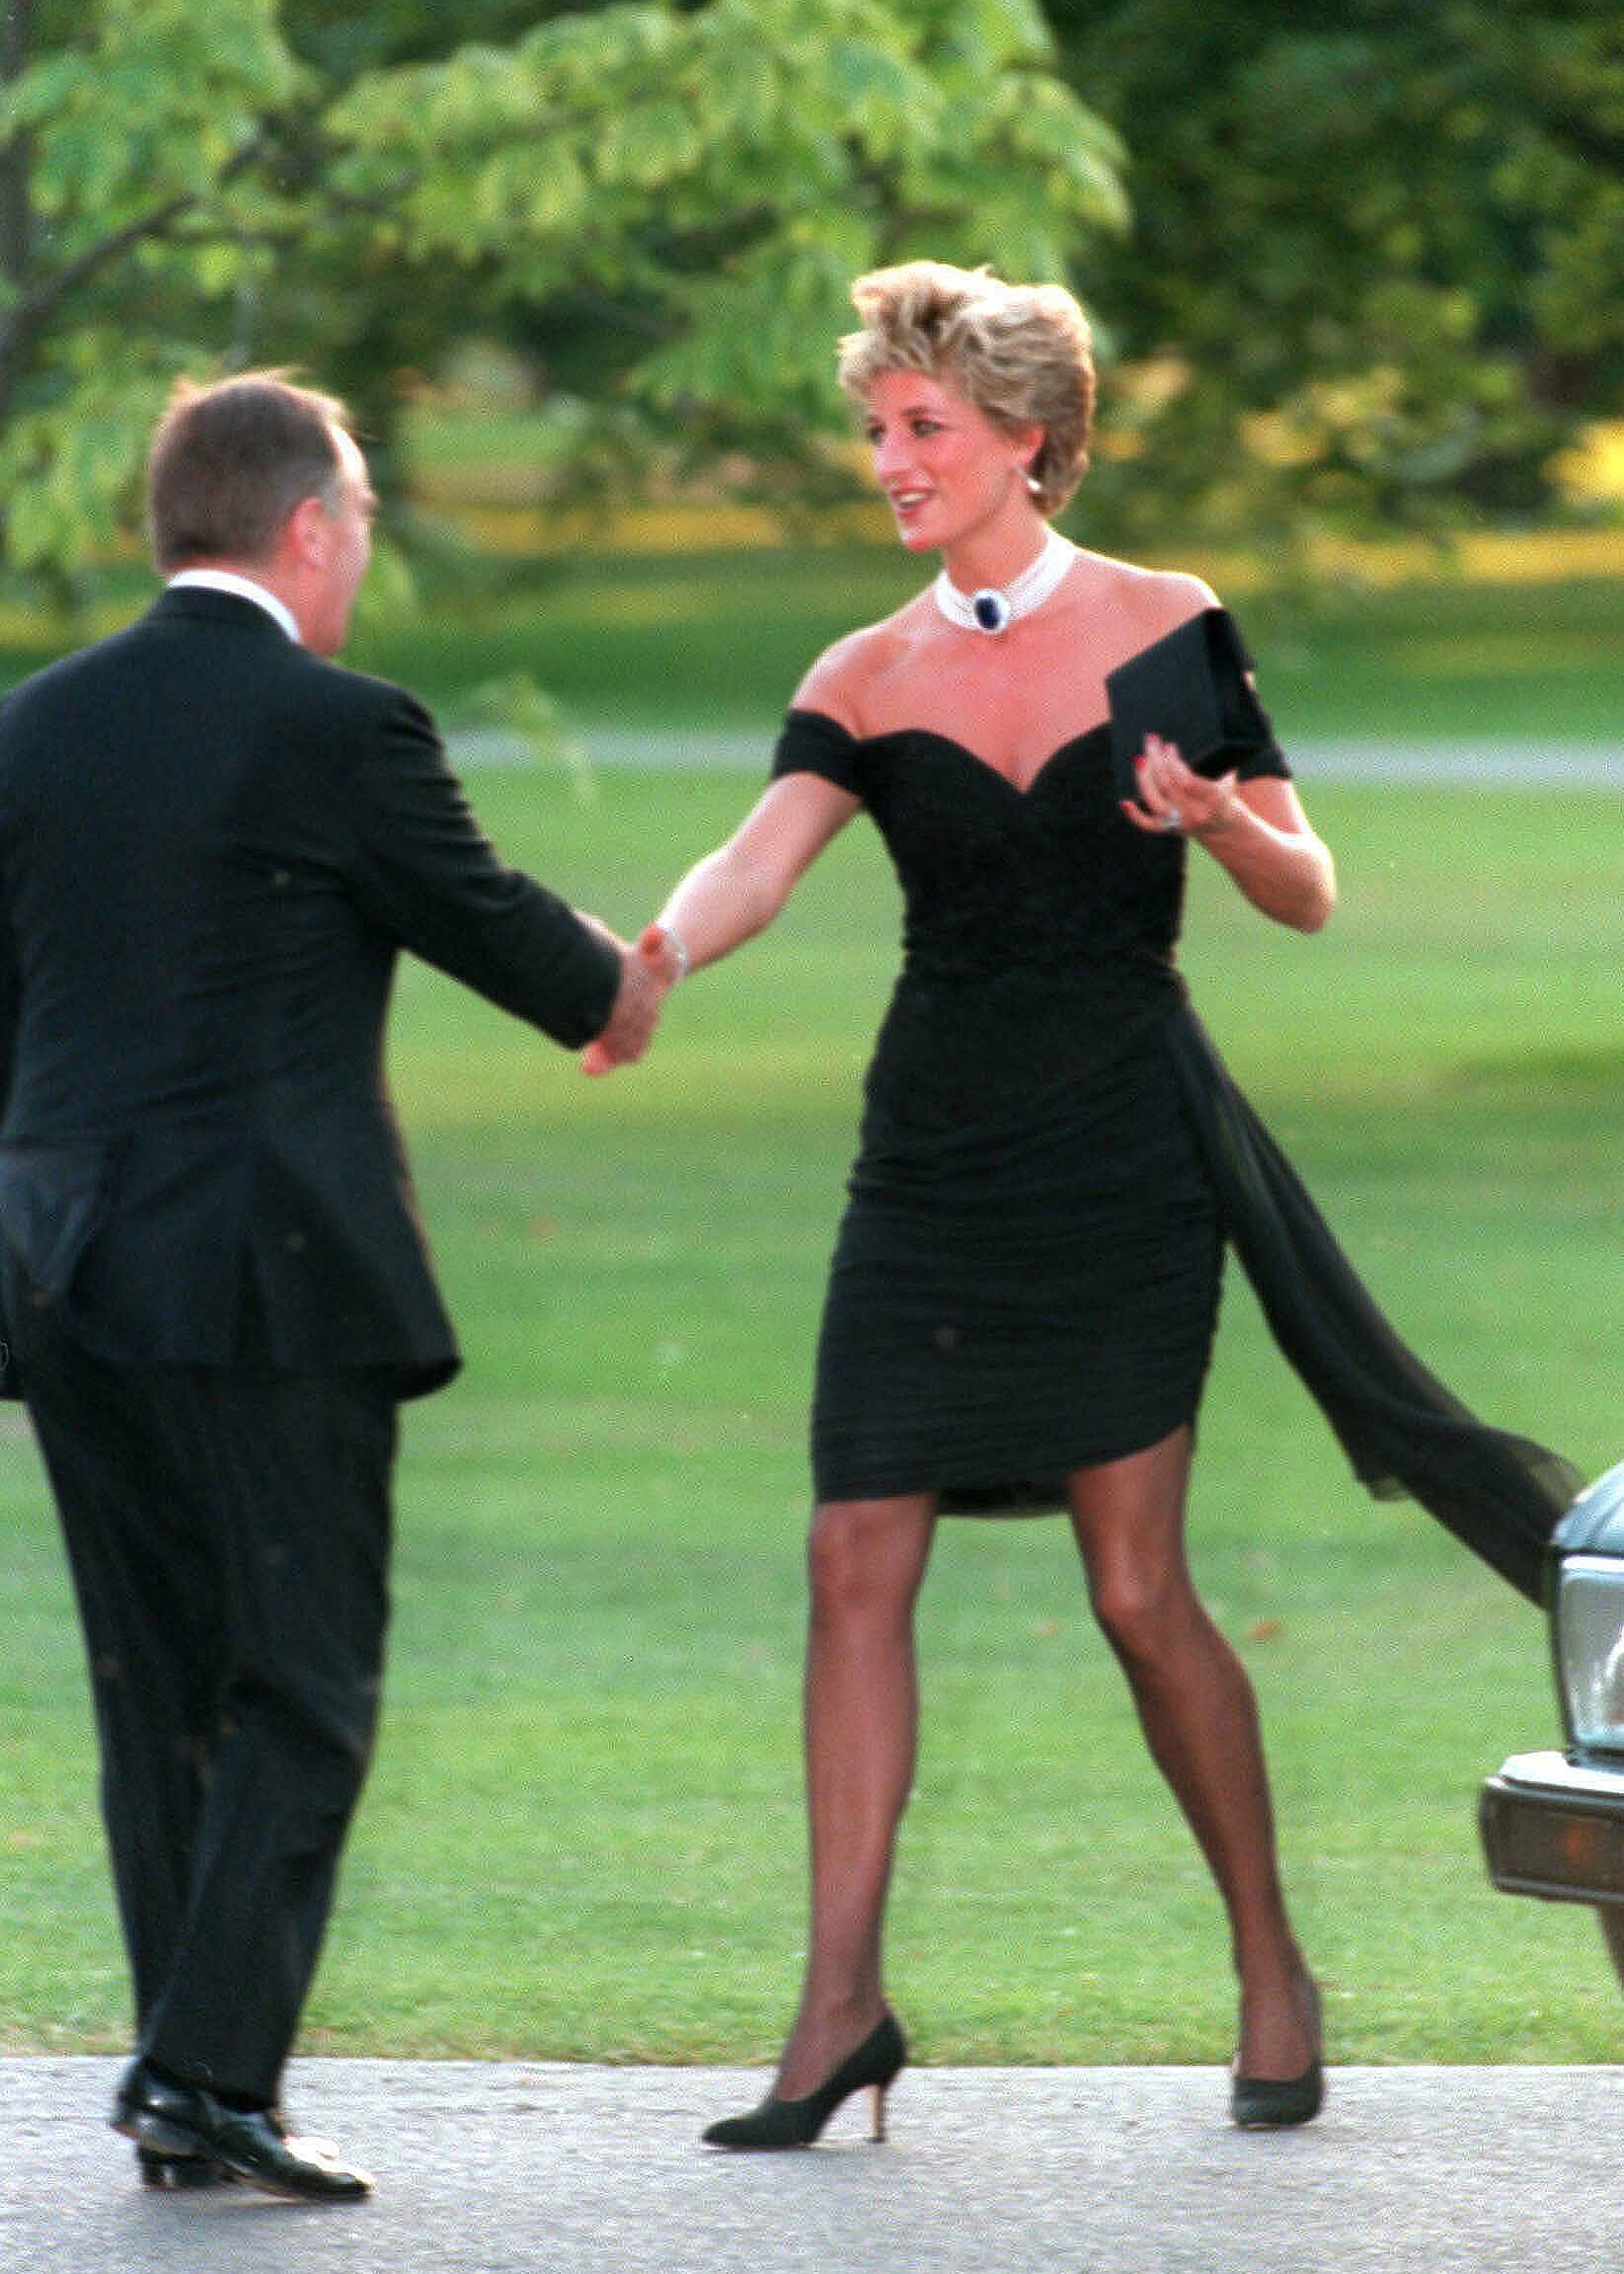 Diana, Princess of Wales, wearing the stunning black dress commissioned by Christina Stambolian to the Vanity Fair party at the Serpentine Gallery in London, England, on June 29, 1994 | Source: Getty Images